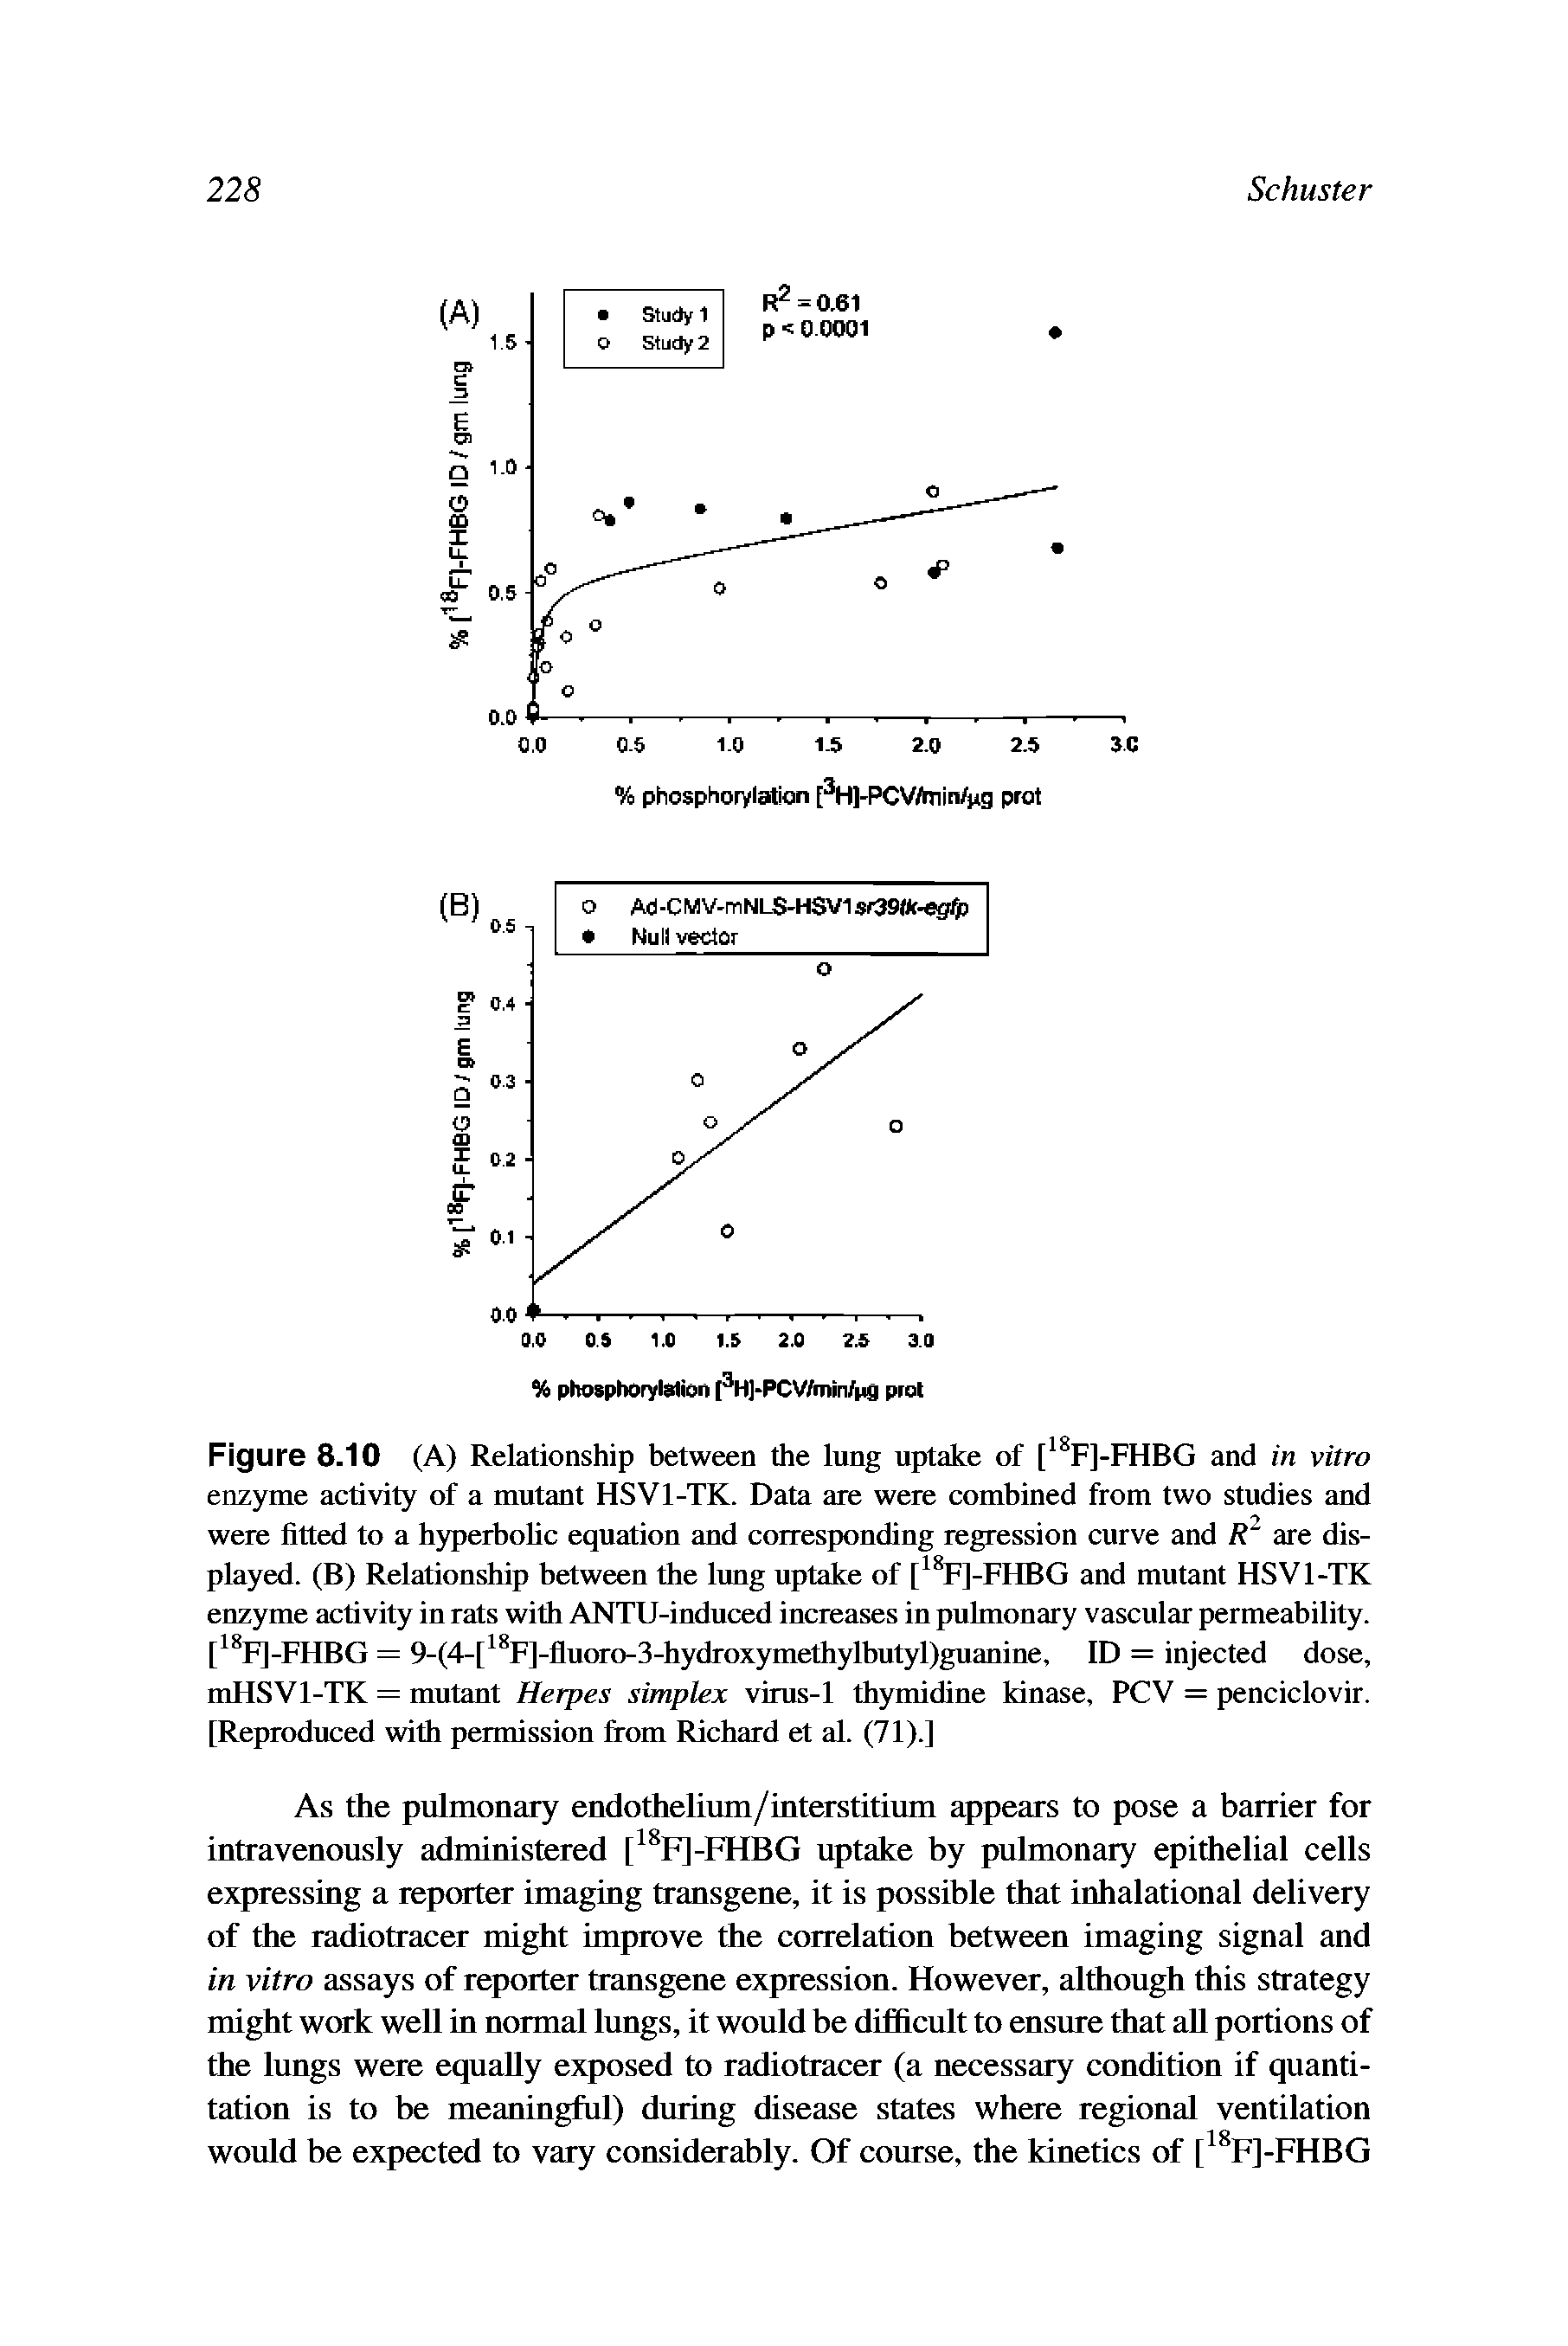 Figure 8.10 (A) Relationship between the lung uptake of [ F]-FHBG and in vitro enzyme activity of a mutant HSVl-TK. Data are were combined from two studies and were fitted to a hyperbolic equation and corresponding regression curve and are displayed. (B) Relationship between the lung uptake of [ F]-FHBG and mutant HSVl-TK enzyme activity in rats with ANTU-induced increases in pulmonary vascular permeability. [1 F]-FHBG = 9-(4-[ F]-fluoro-3-hydroxymethylbutyl)guanine, ID = injected dose, mHSVl-TK = mutant Herpes simplex virus-1 thymidine kinase, PCV = penciclovir. [Reproduced with permission from Richard et al. (71).]...